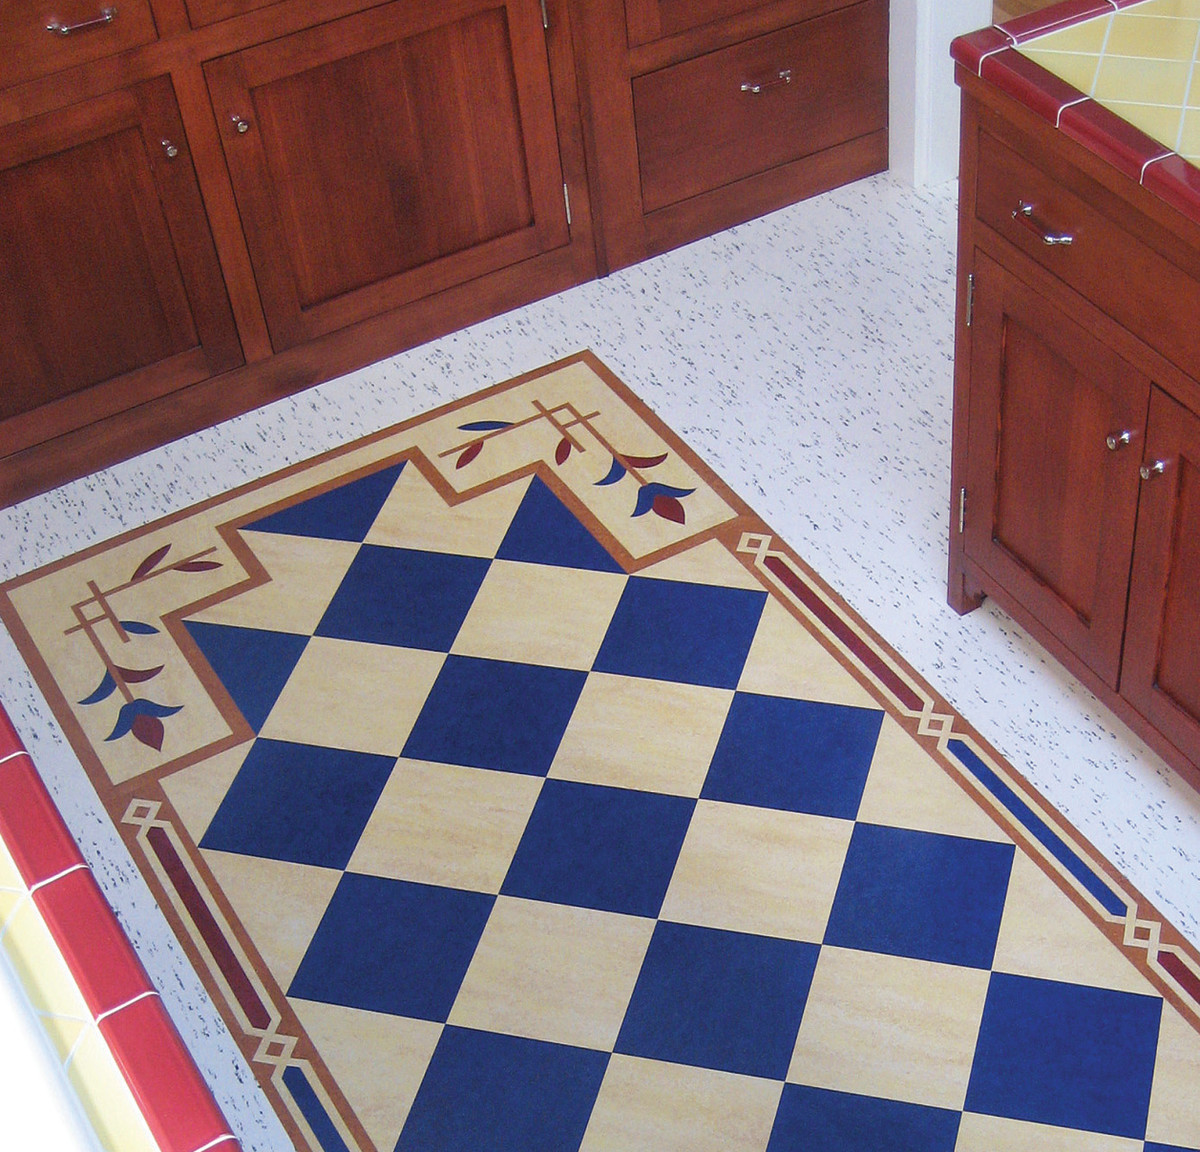 Crogan’s movable linoleum rugs are an affordable option.